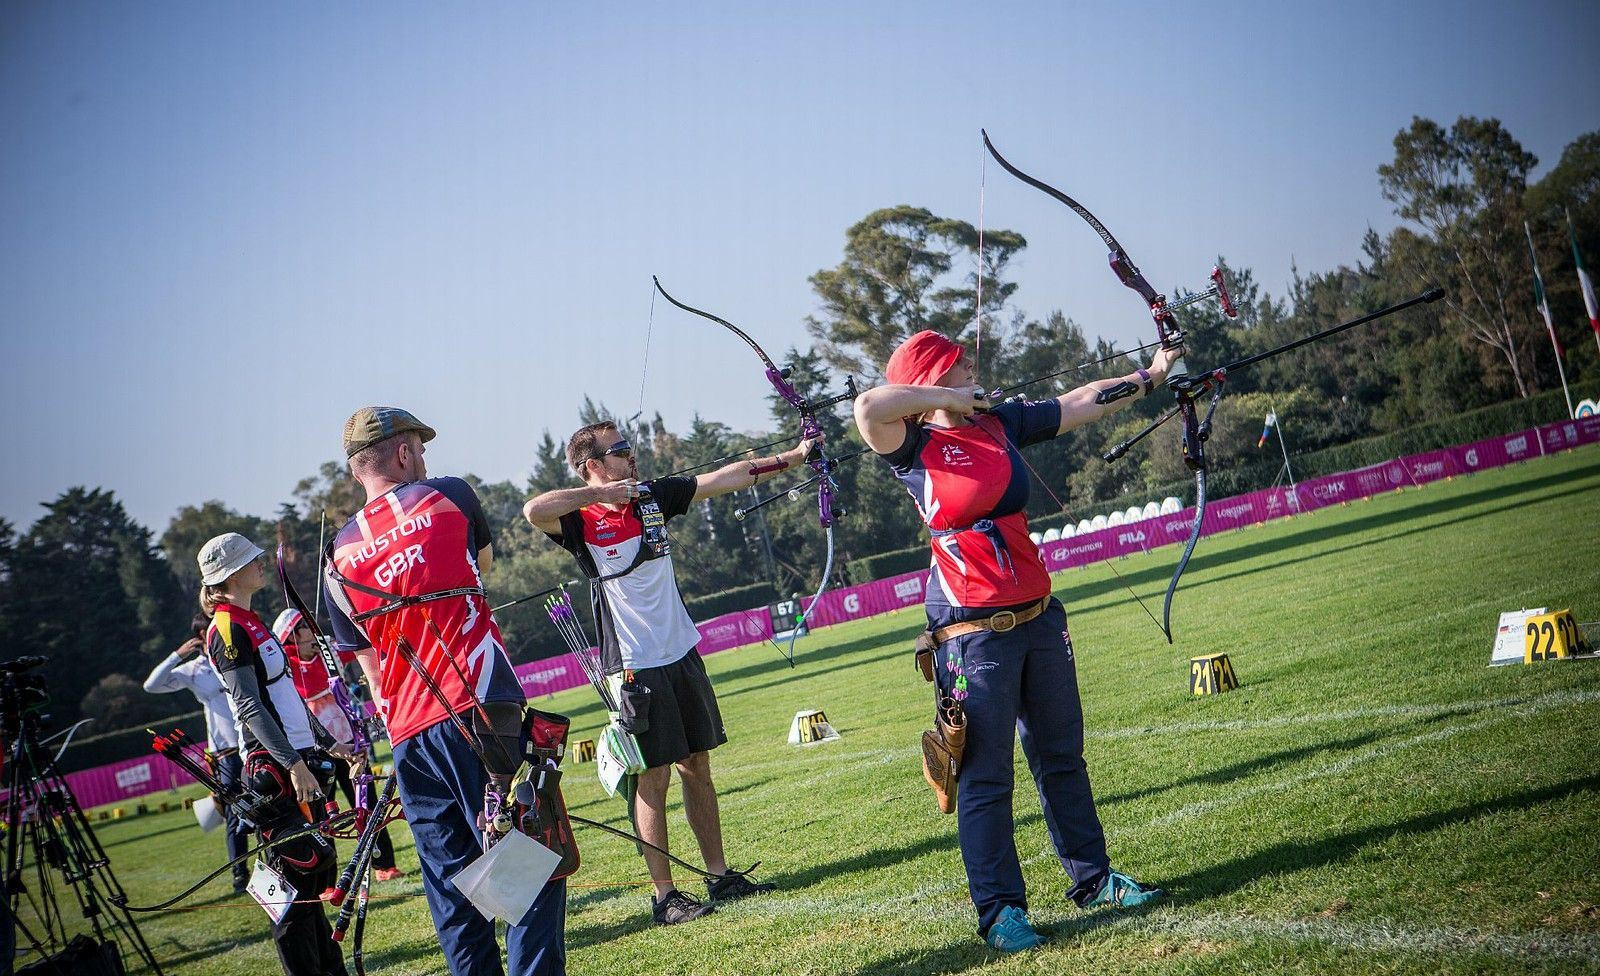 Germany through to compound and recurve mixed team finals at World